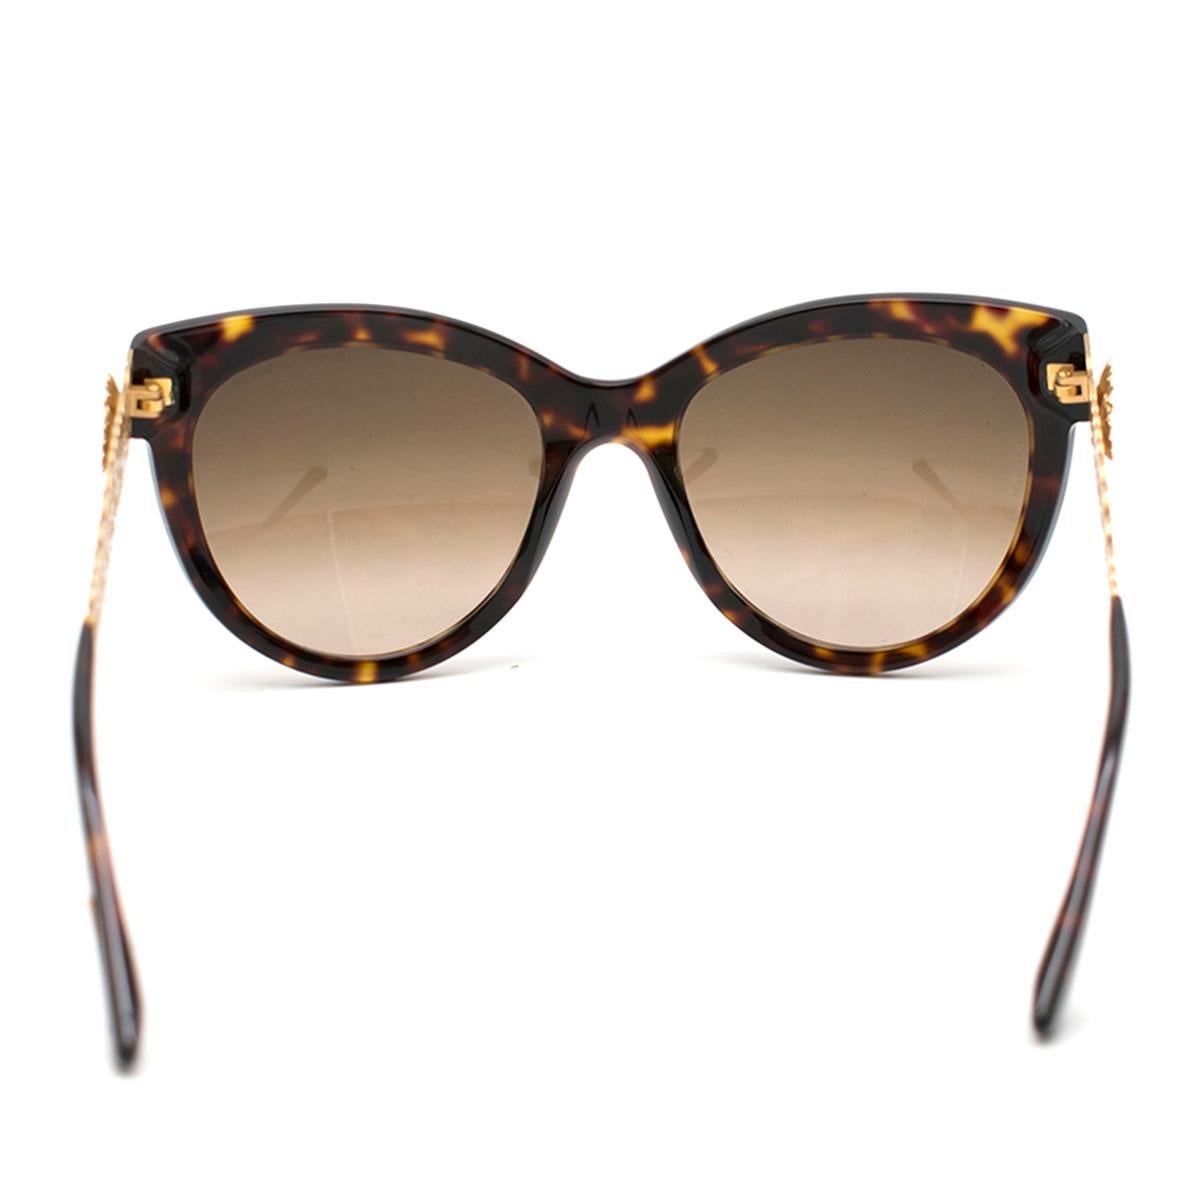 Brown Dolce & Gabbana Cat-Eye Sunglasses With Golden Filigree Arms